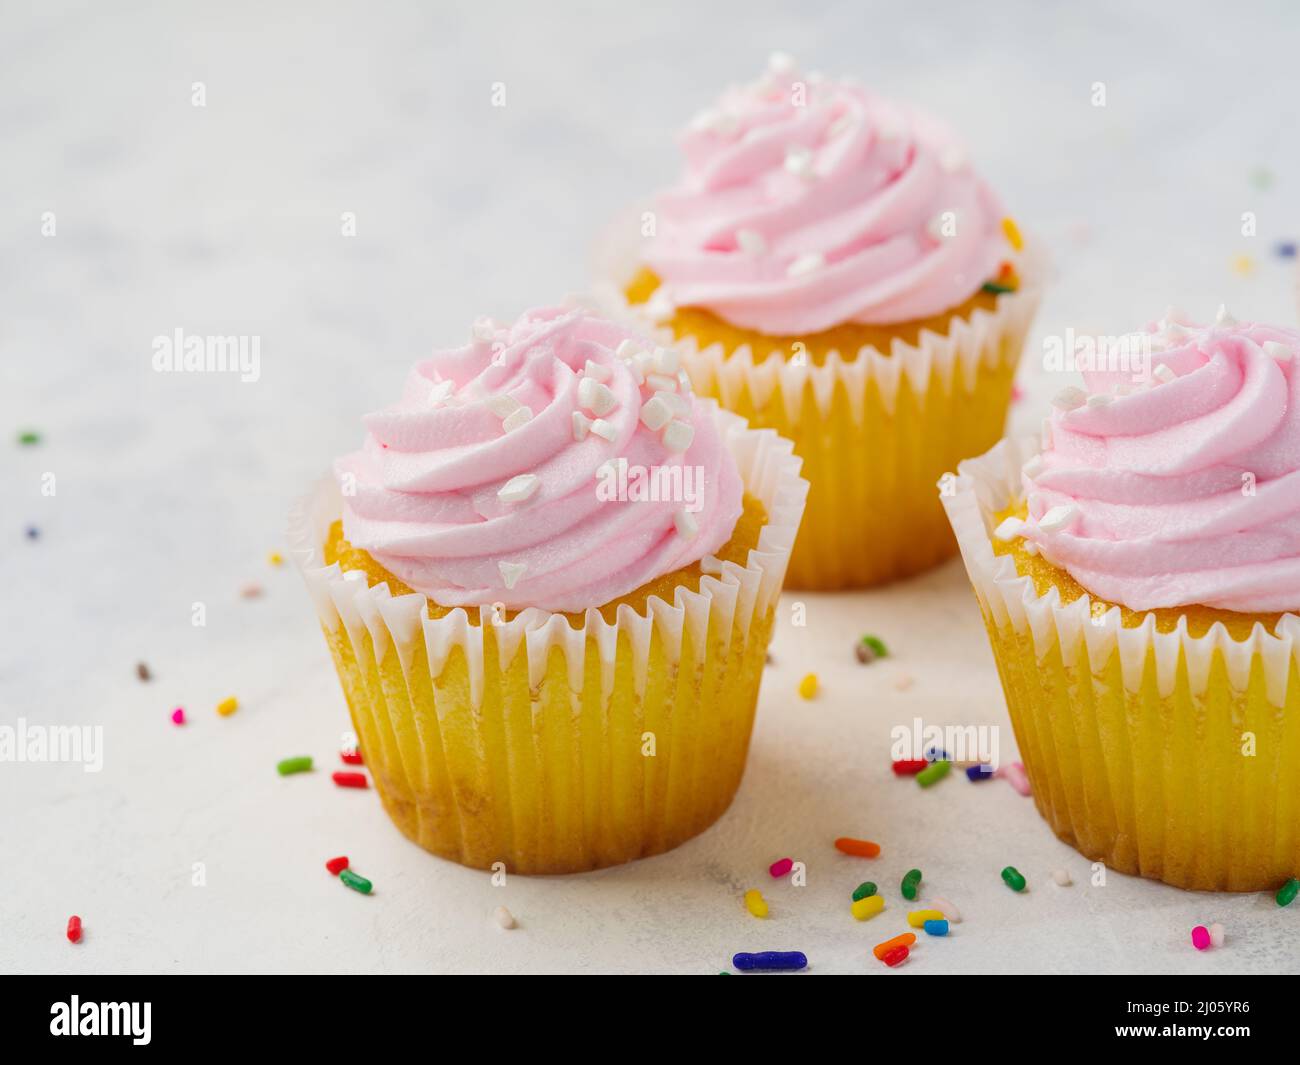 Multi-colored confetti are scattered on a white background. Cupcakes with cream. Sweet food, holiday. Restaurant, hotel, cafe, culinary blog, pastry s Stock Photo